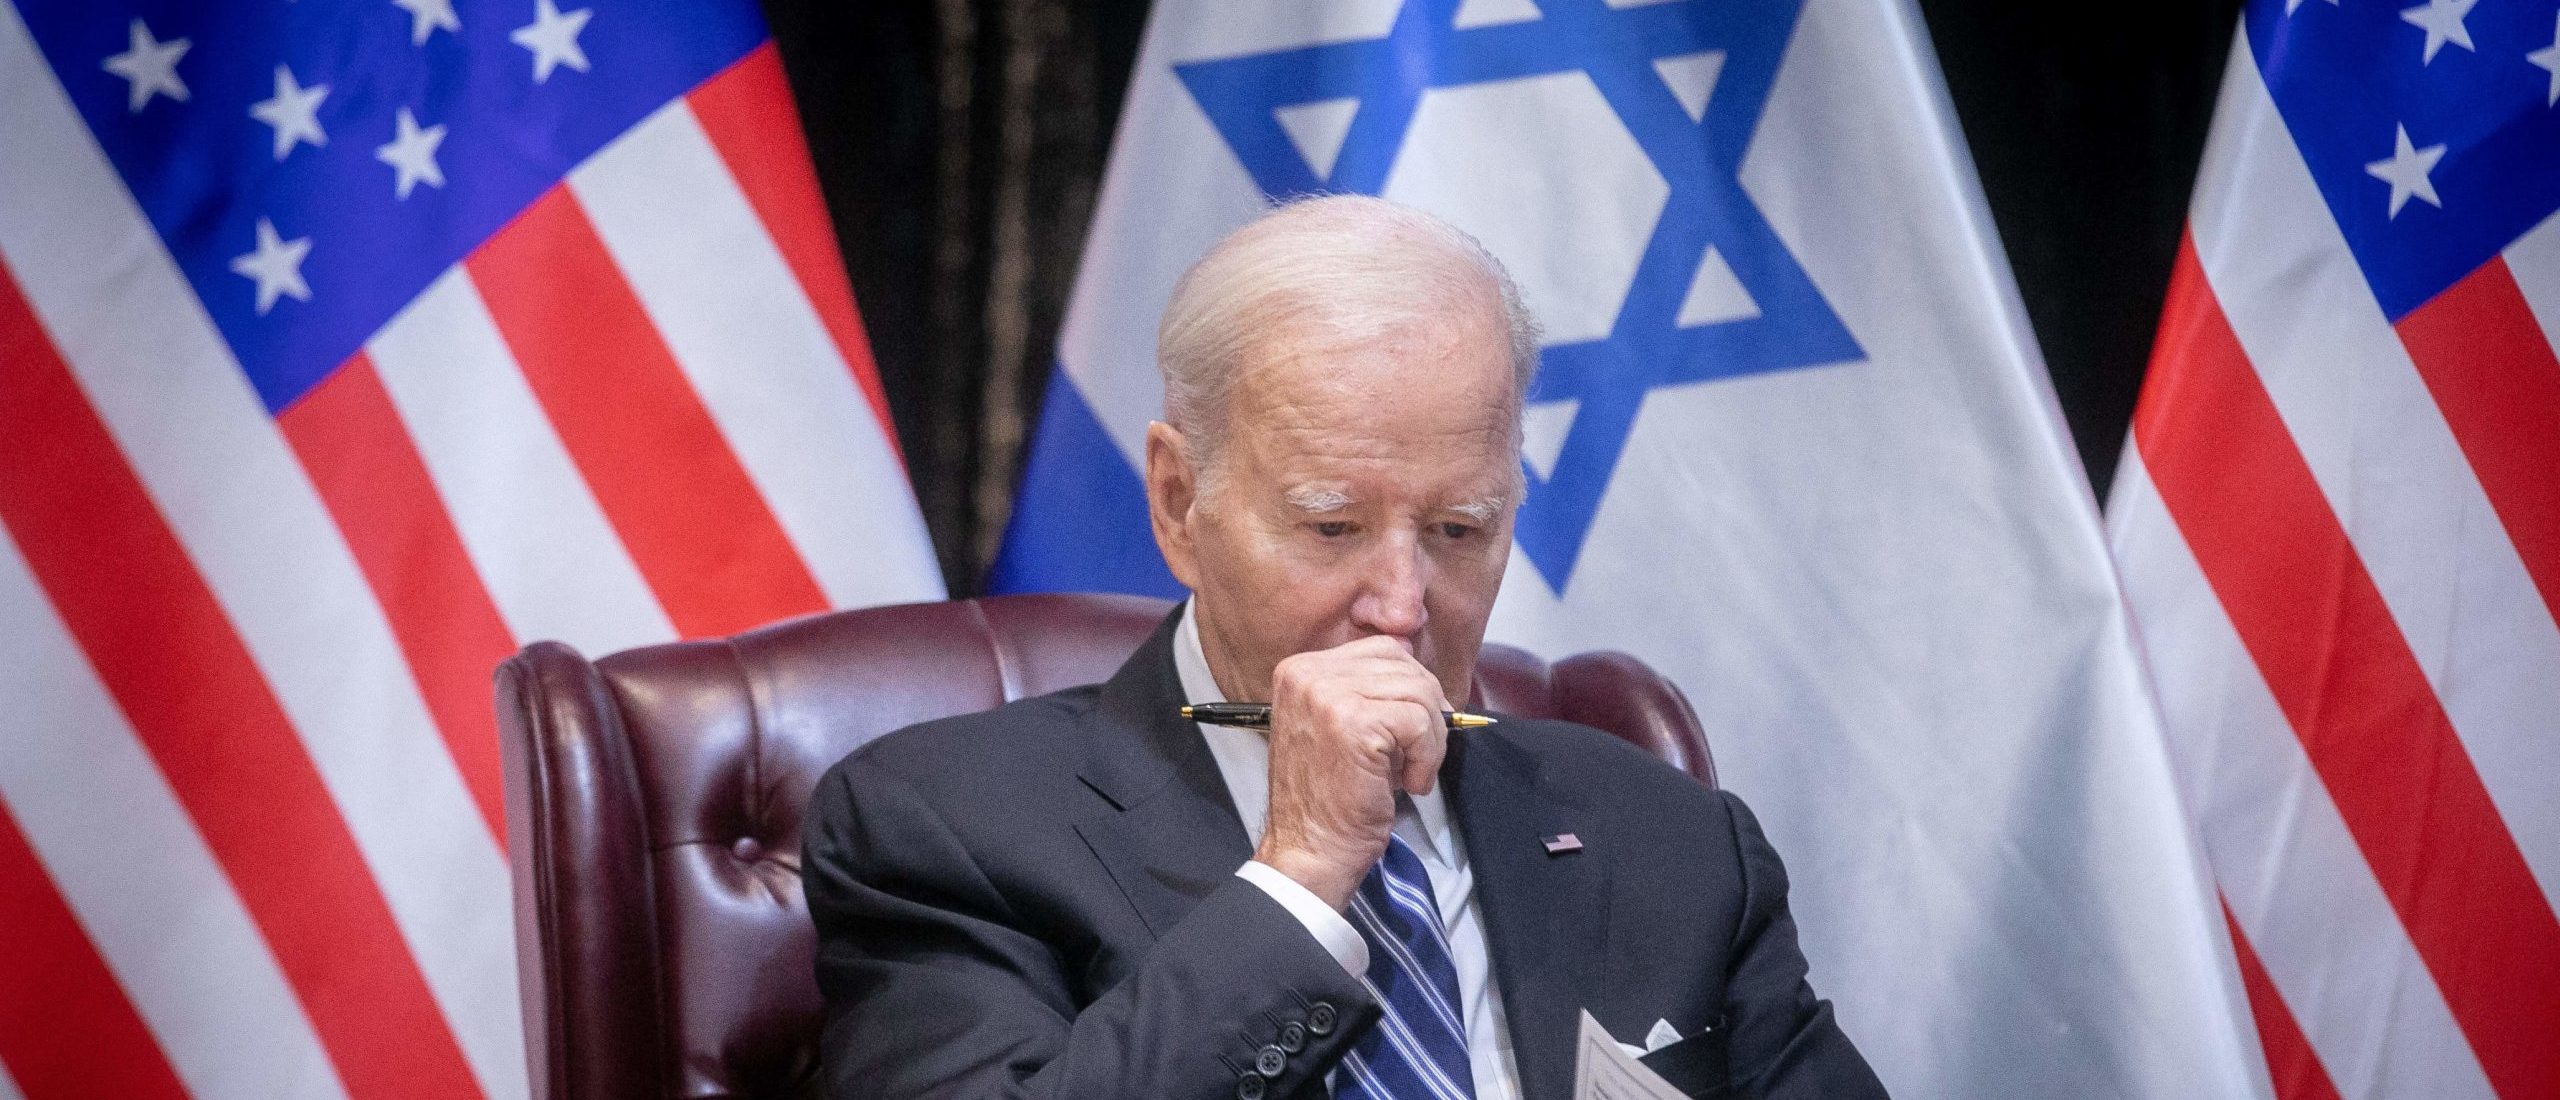 Did Biden Just Hand Hamas A Big Gift In Its War Against Israel?